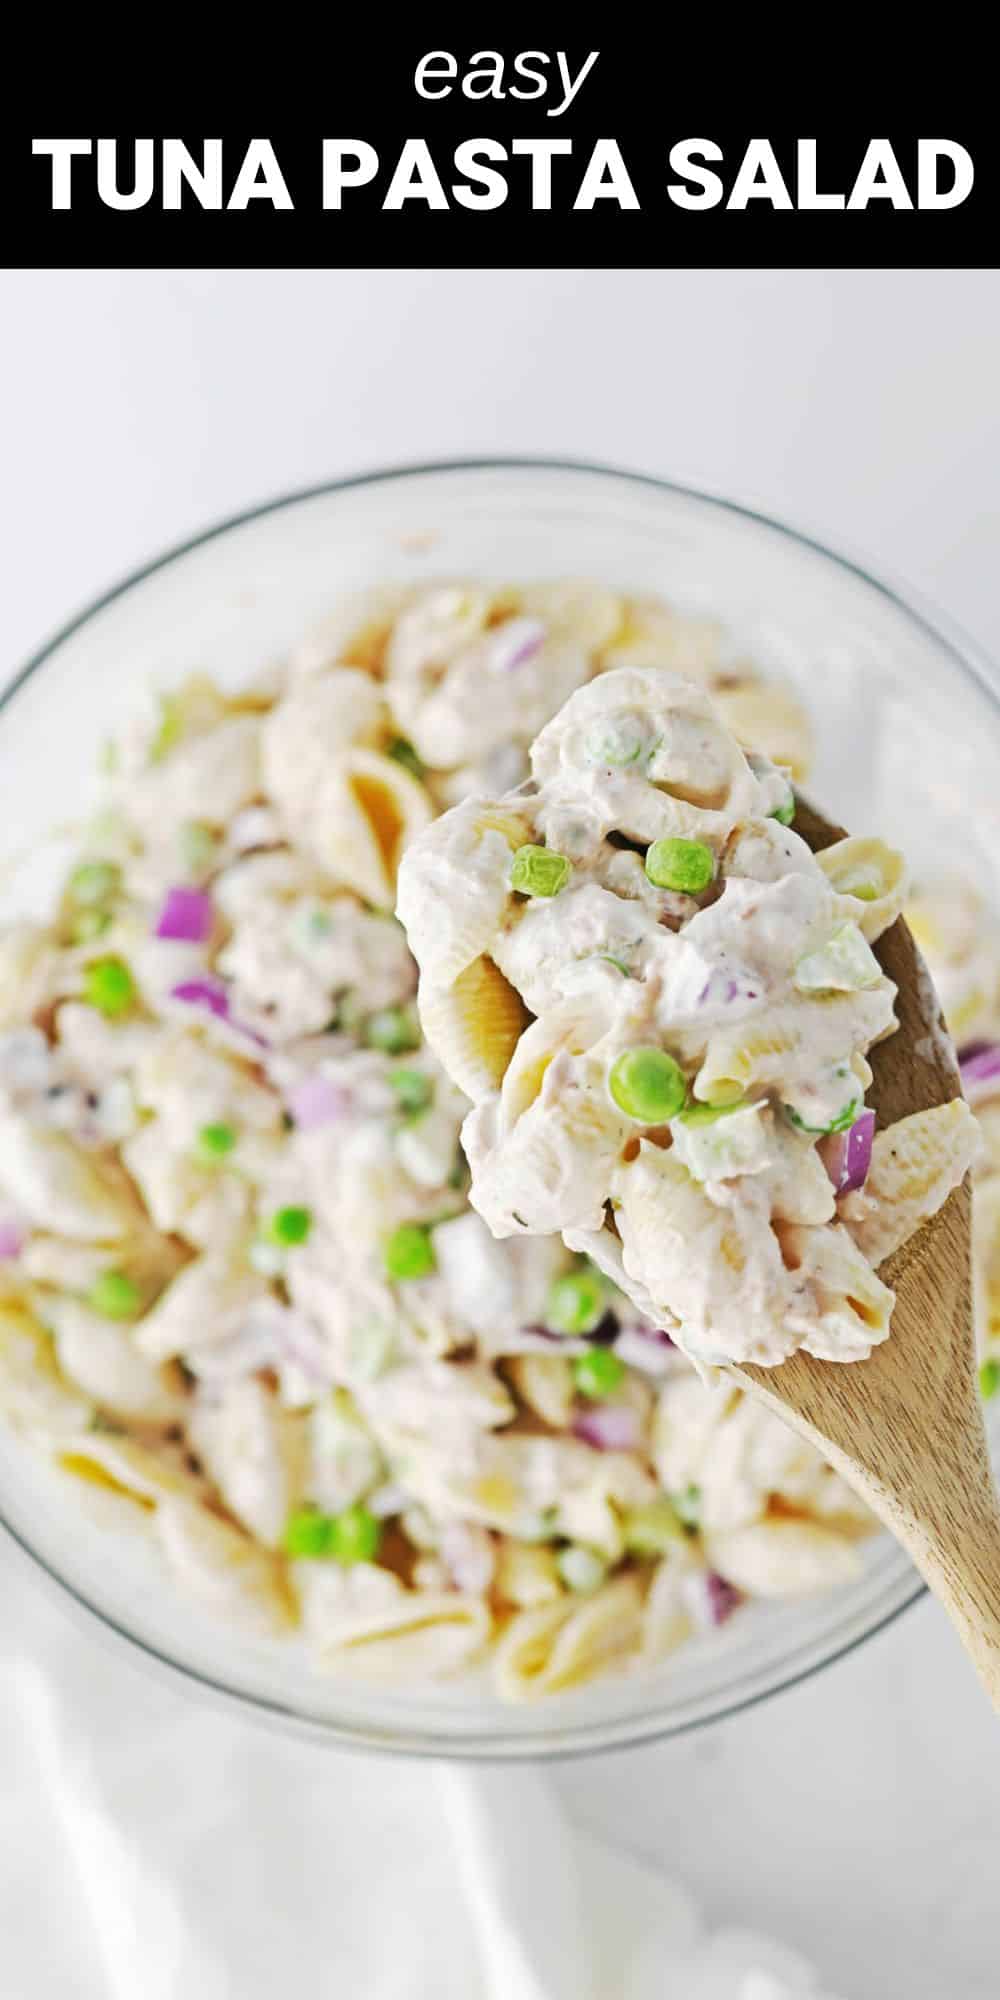 This recipe for Tuna Pasta Salad is made with a mouth-watering combination of tender pasta, flaky tuna and fresh veggies, with a creamy sauce. This deliciously satisfying pasta dish is ideal for your next backyard barbecue, potluck, or easy weekday meal.